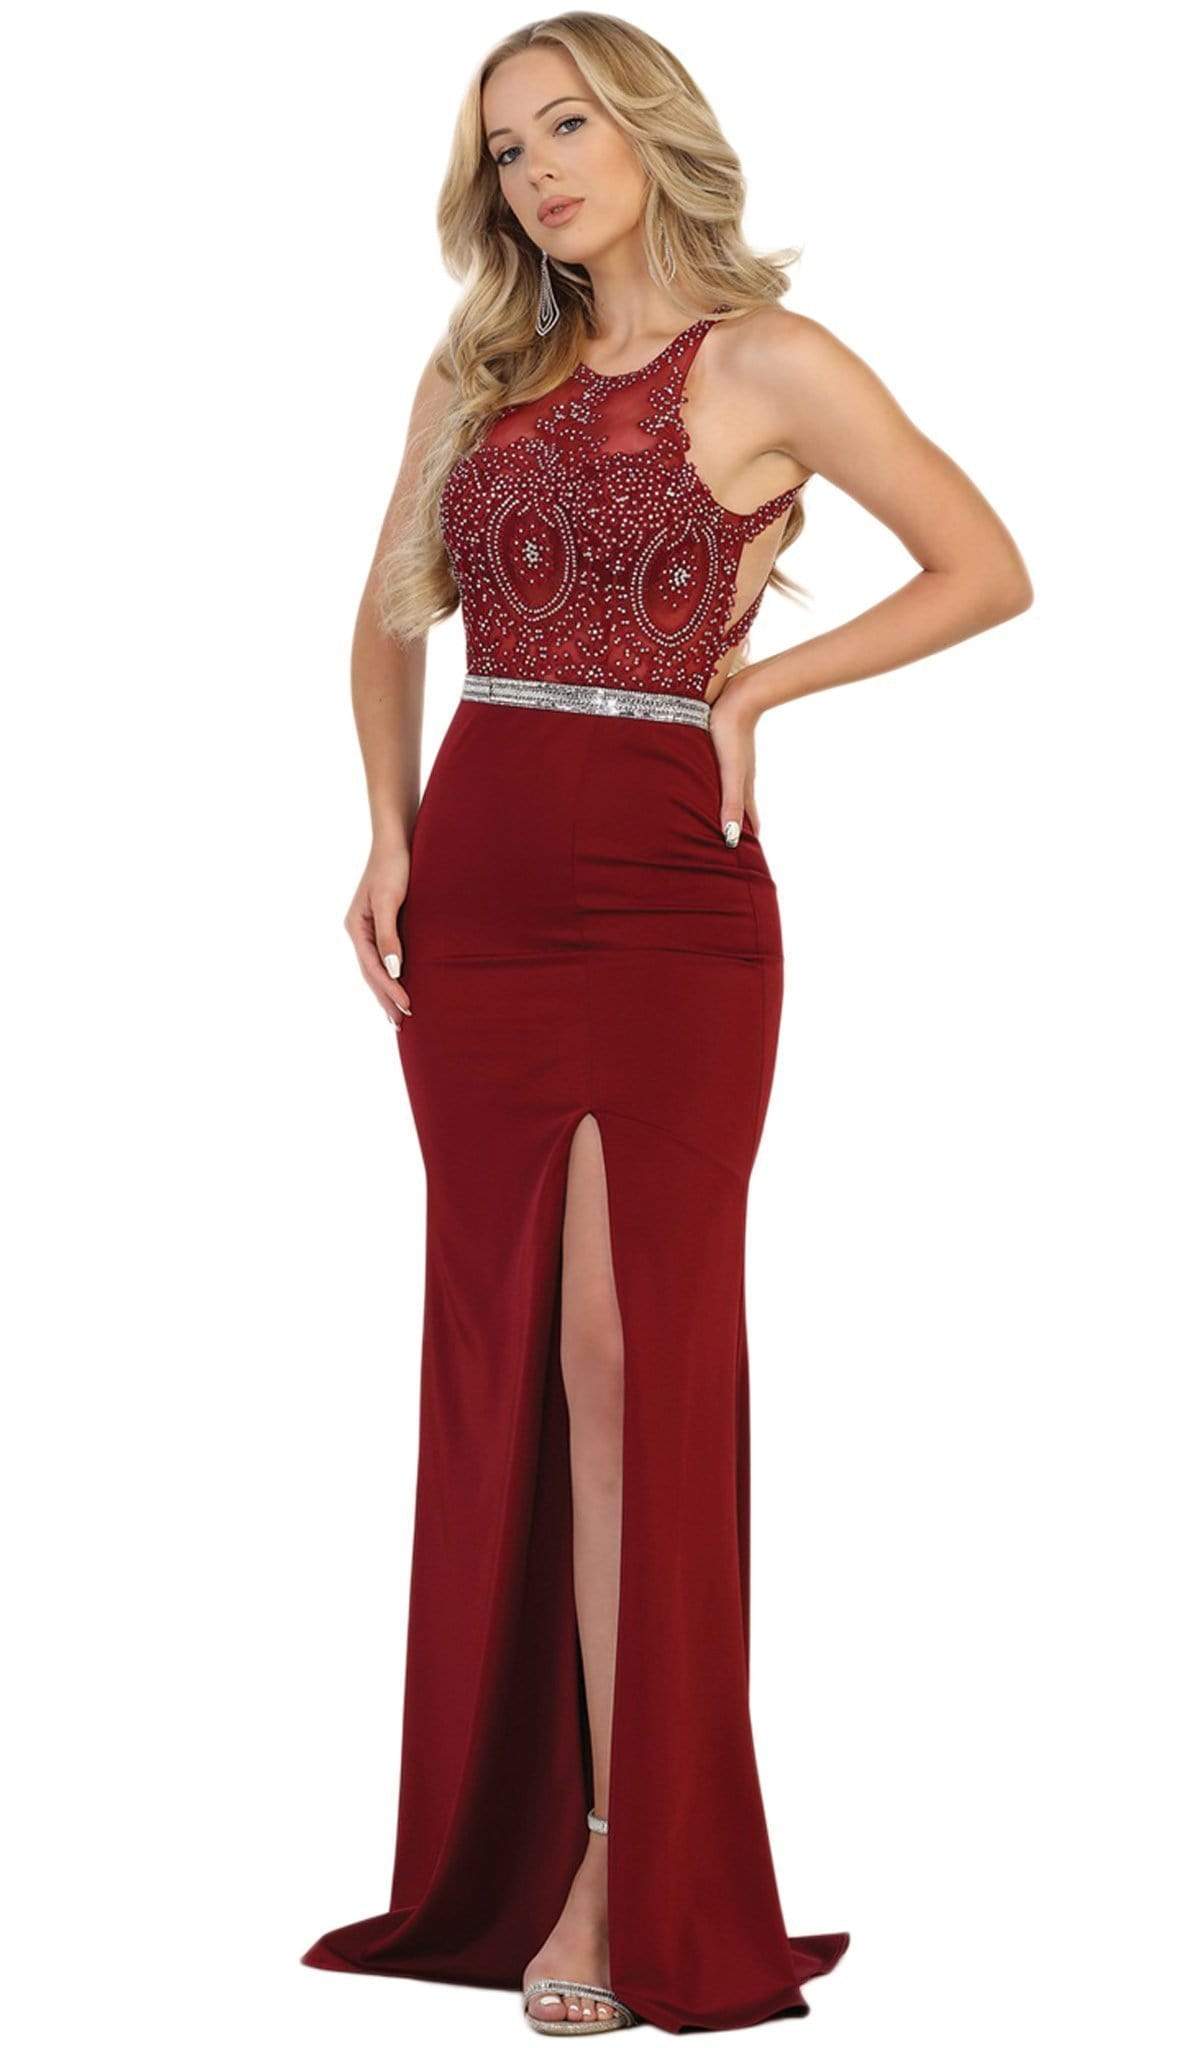 May Queen - Strappy Illusion Prom Dress with Slit Special Occasion Dress 2 / Burgundy